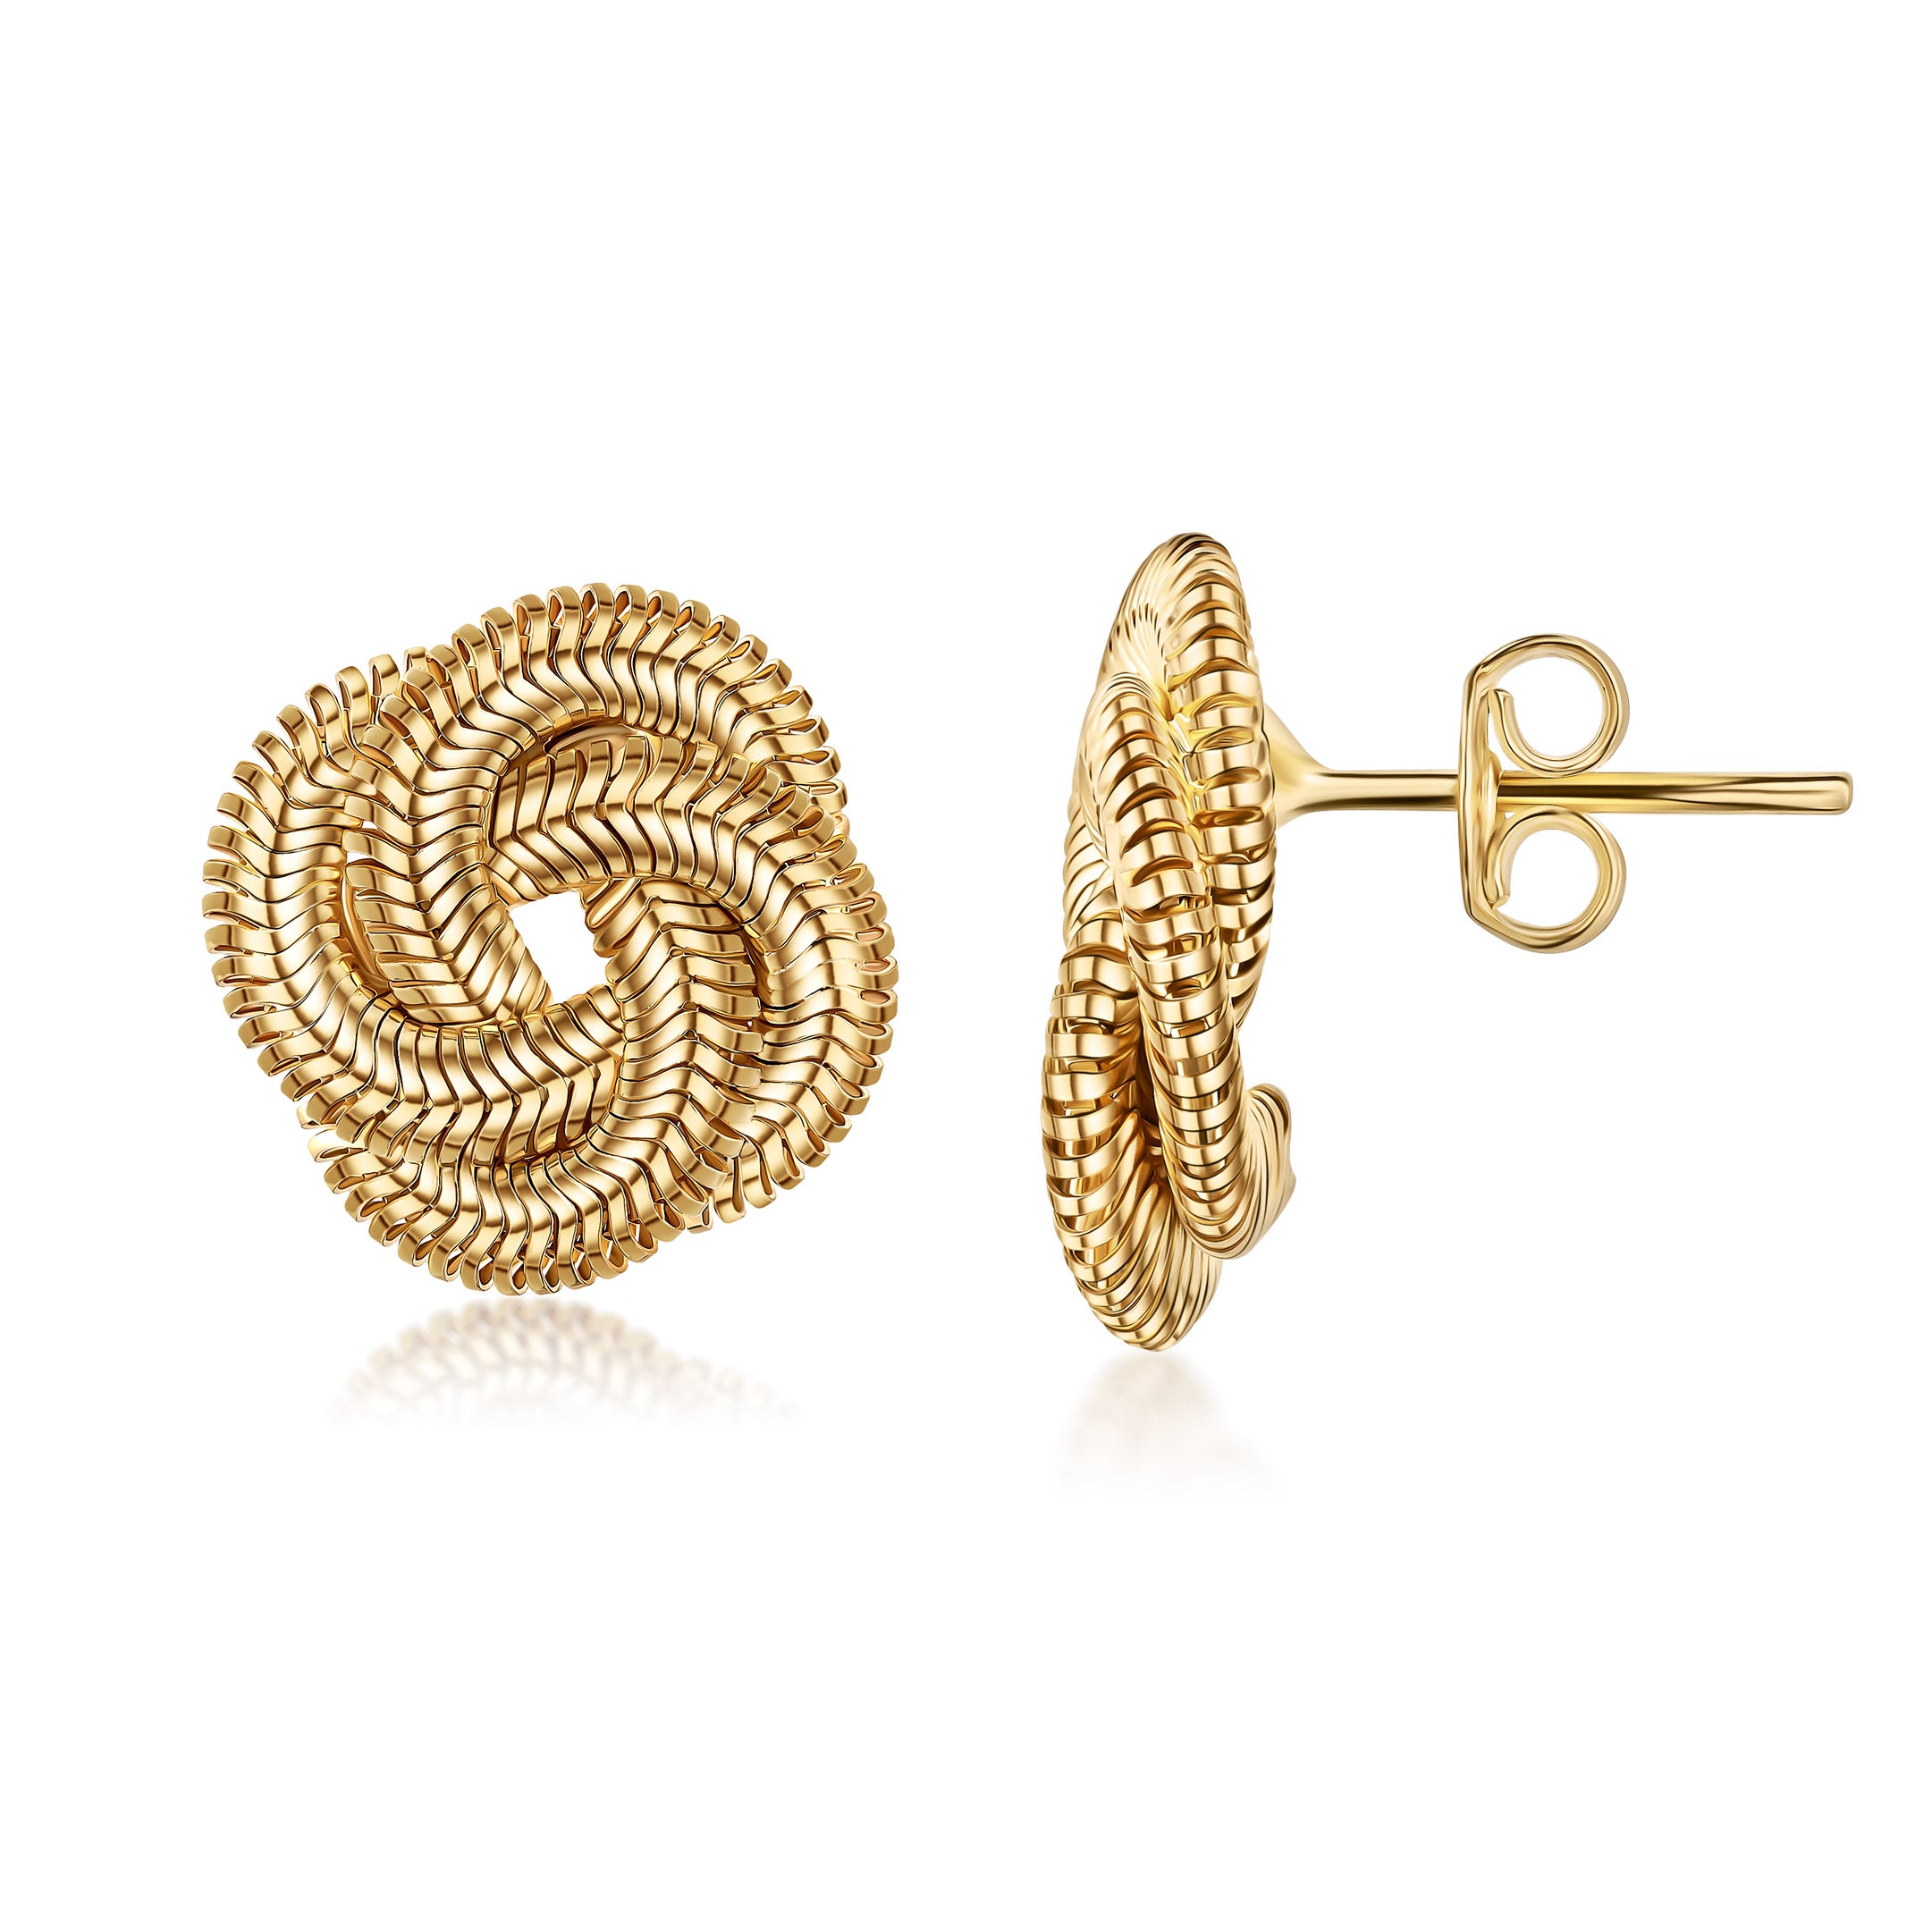 18K Gold Plated Twisted Knot Earrings